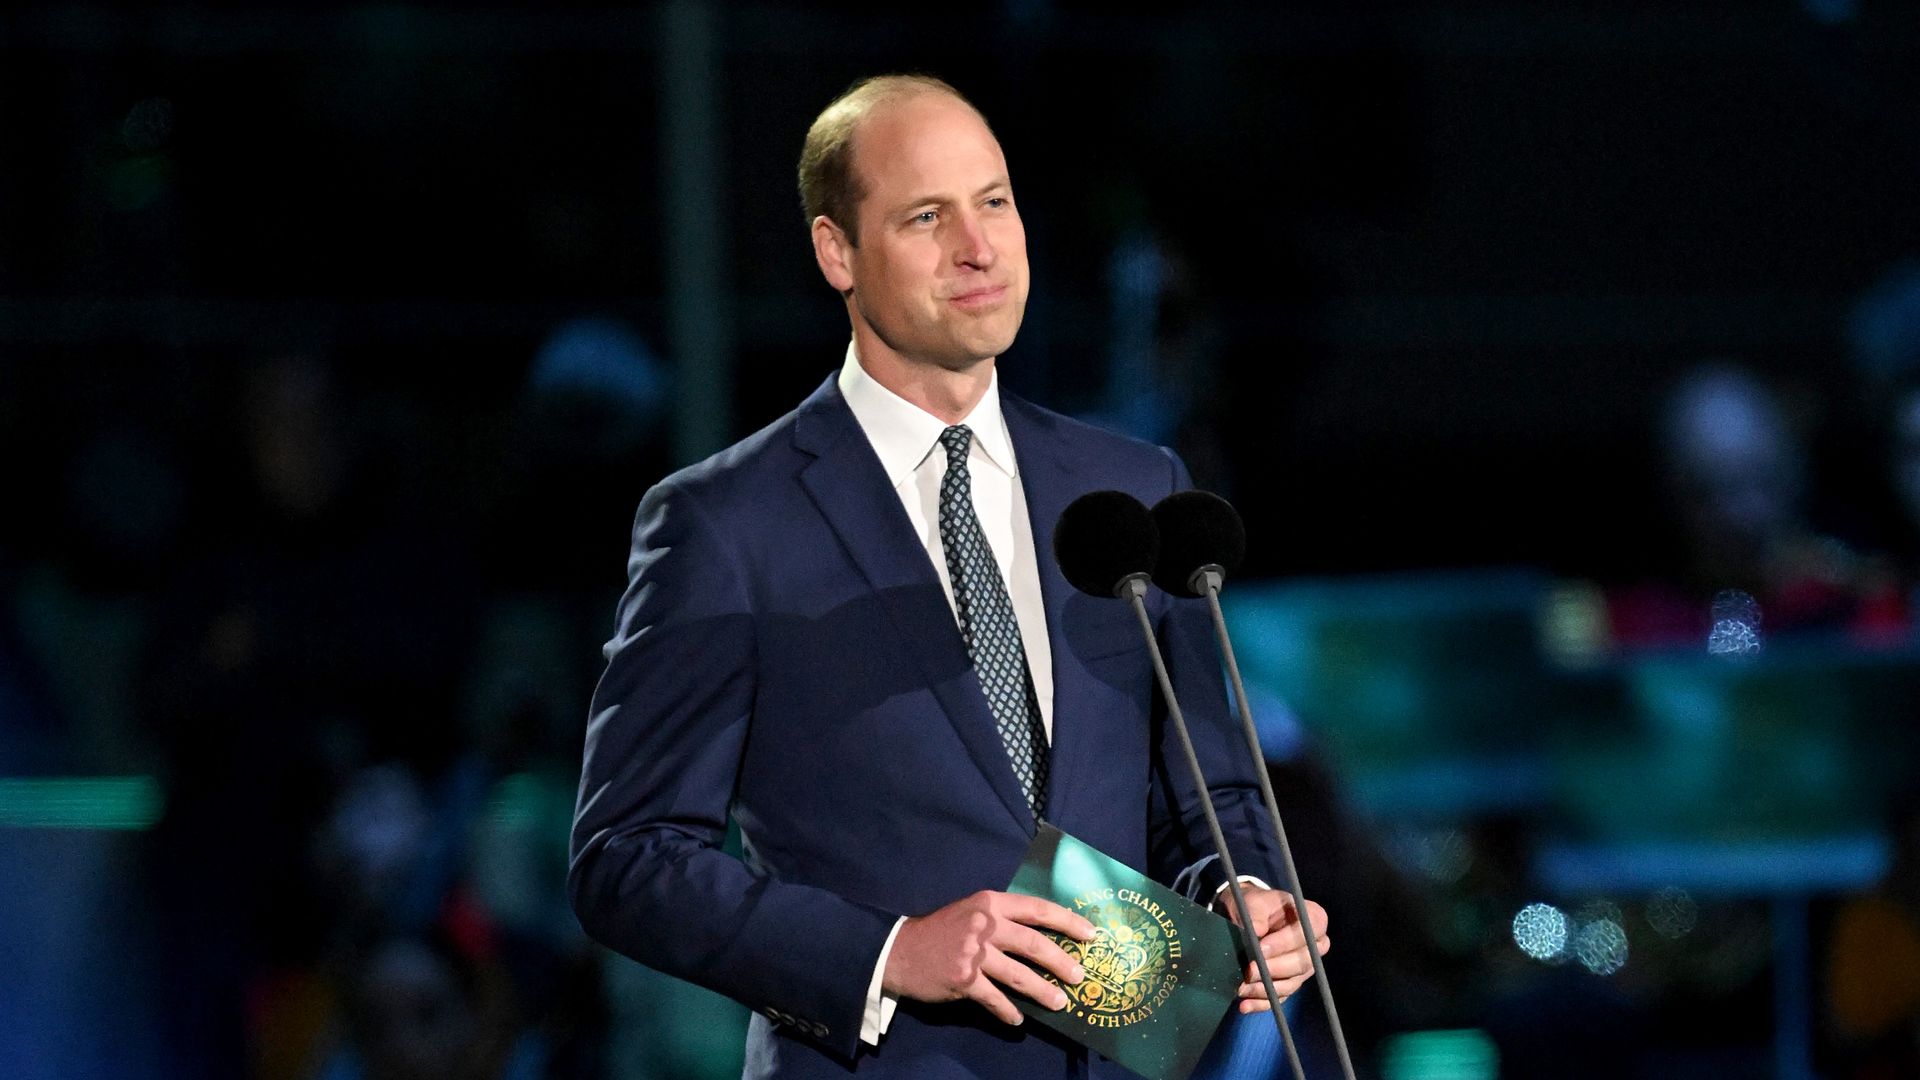 Prince William paid tribute to his father, the King, and the late Queen Elizabeth II